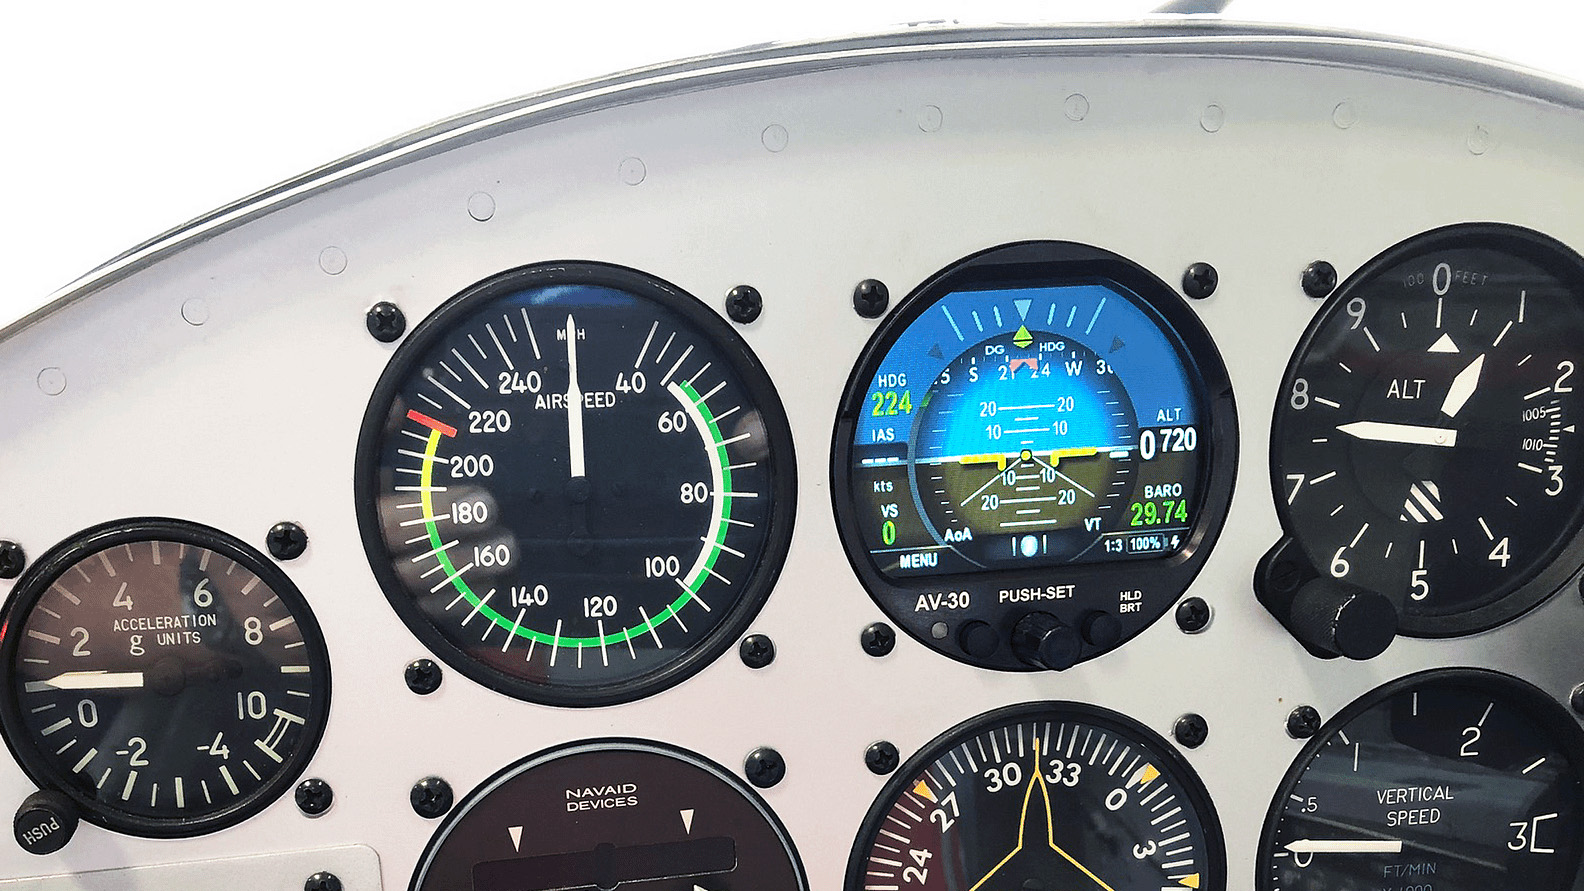 The uAvionix AV-30-C, seen here as a primary attitude indicator, requires just four inputs: power, ground, pitot, and static. Internal sensors measure acceleration, and connection to a GPS source is optional. Photo courtesy of uAvionix.